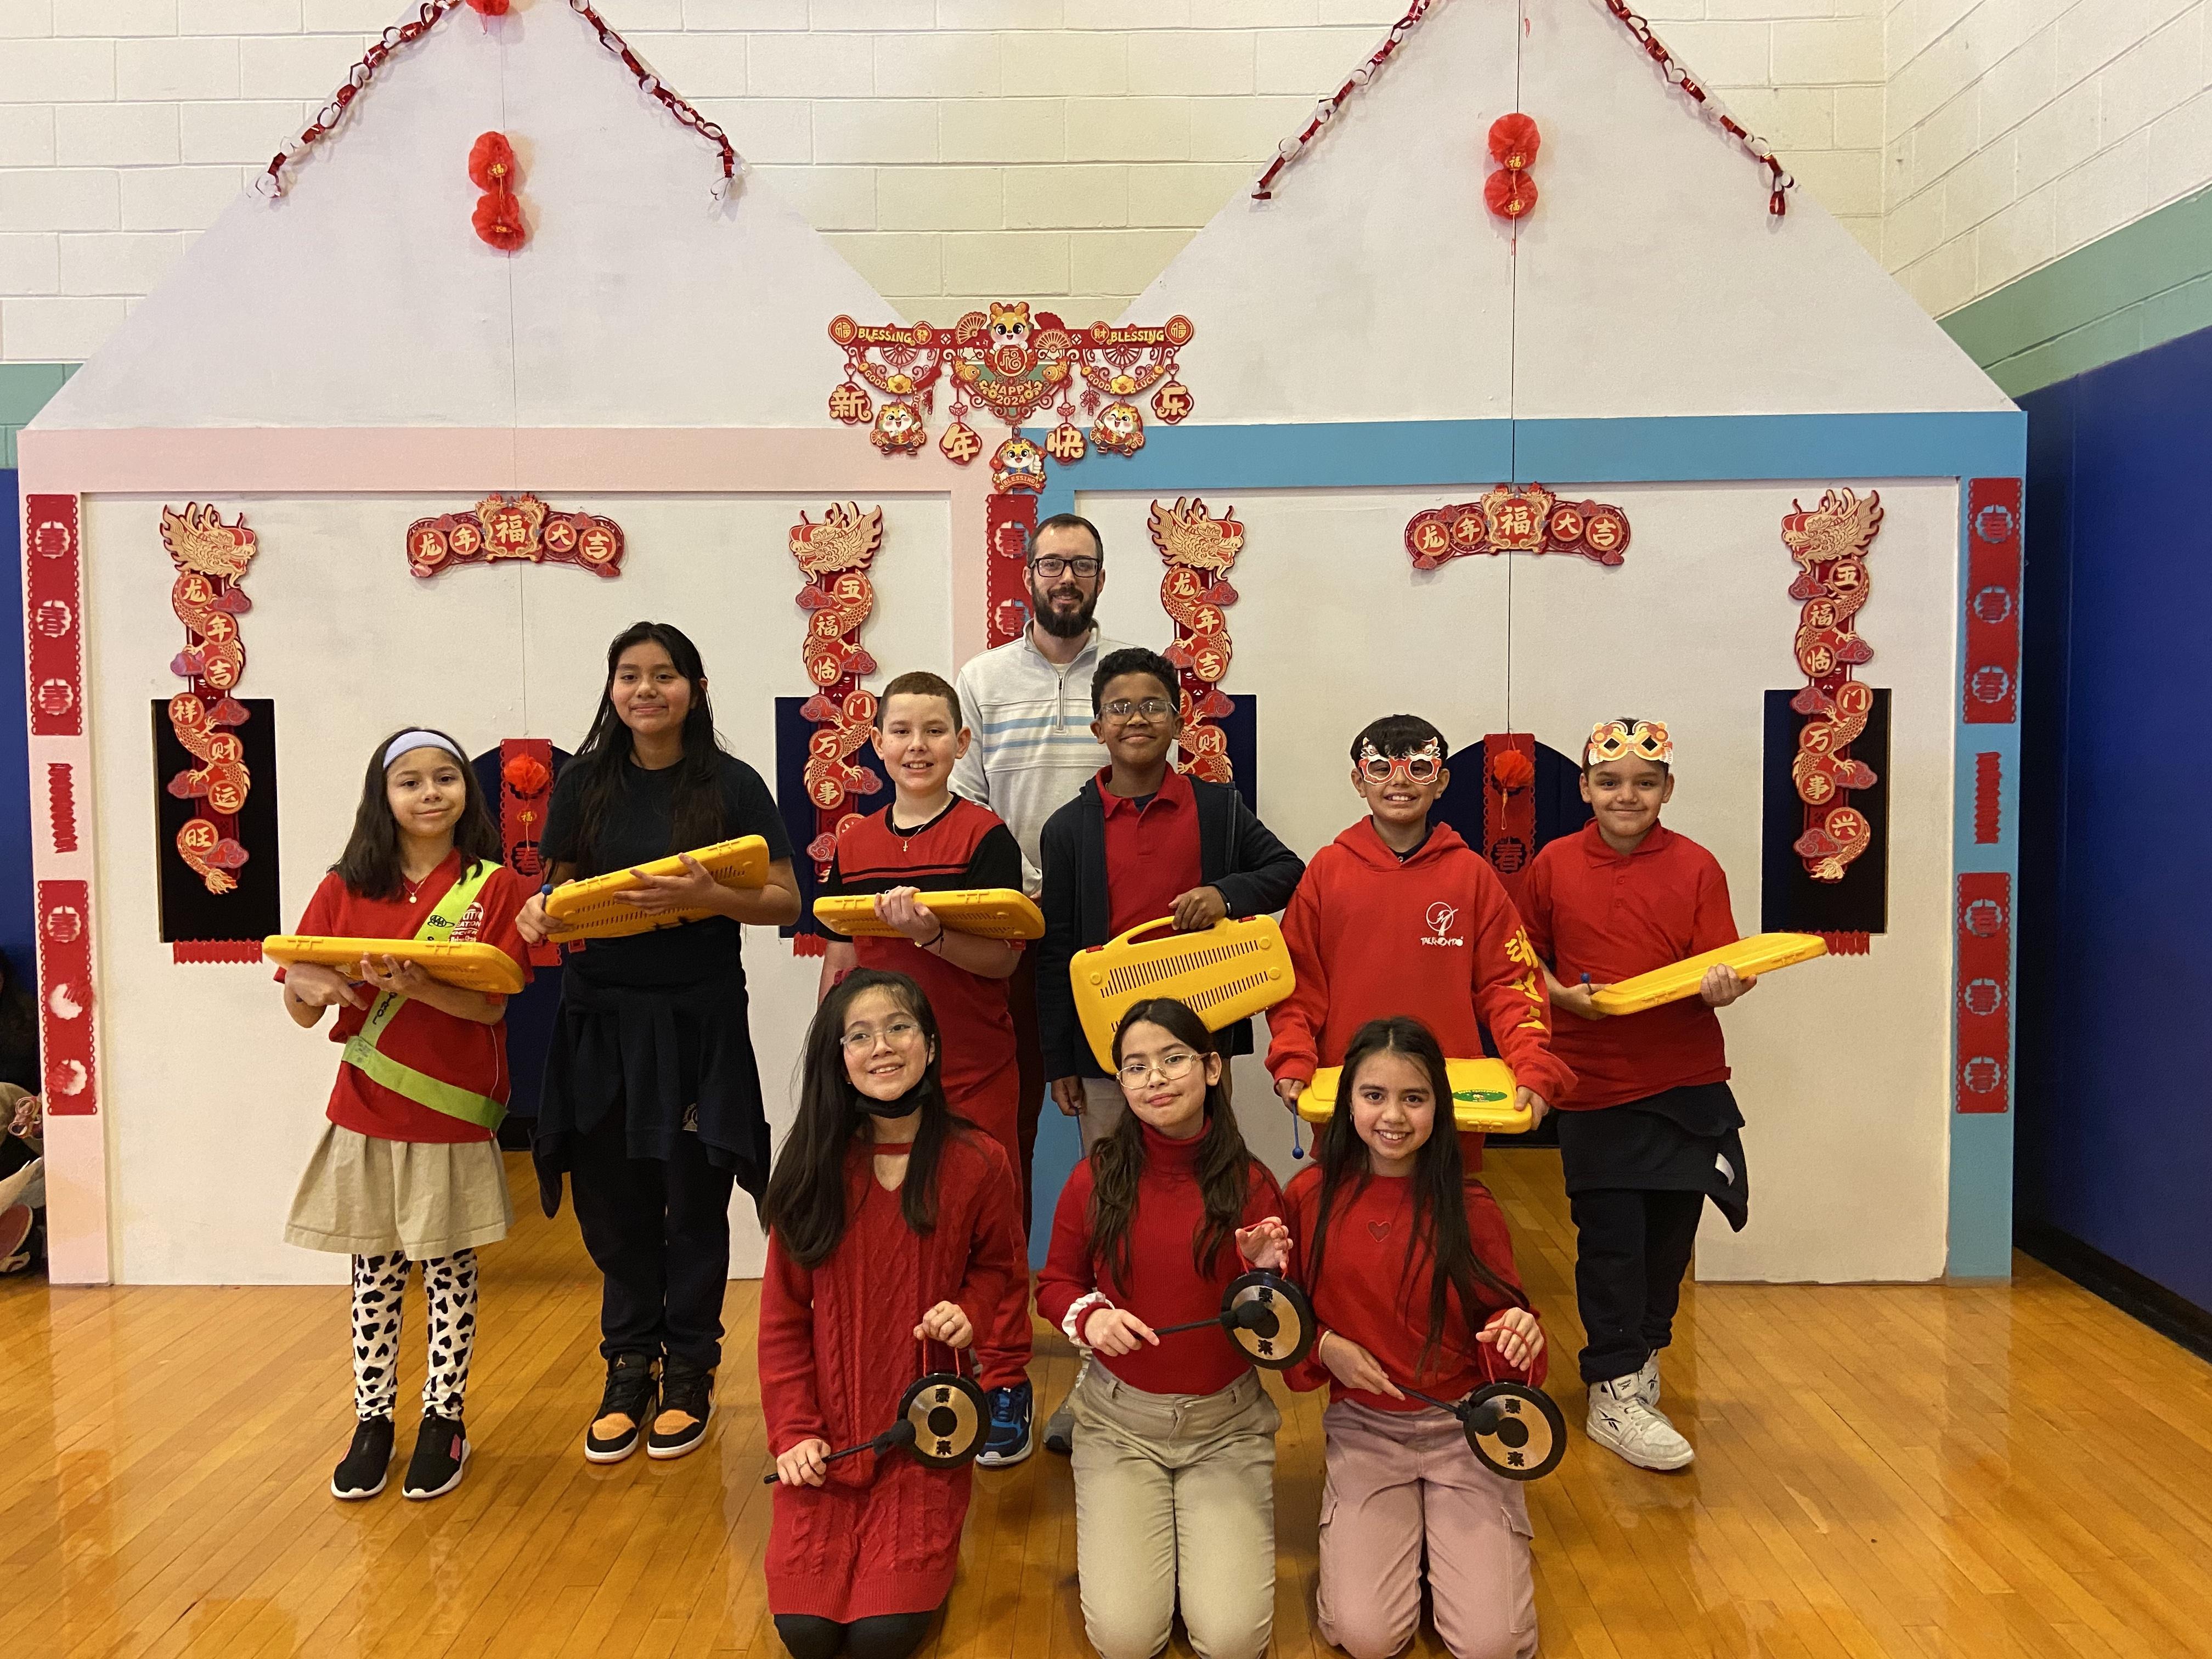 Celebrating The Lunar New Year at the Colin Powell School